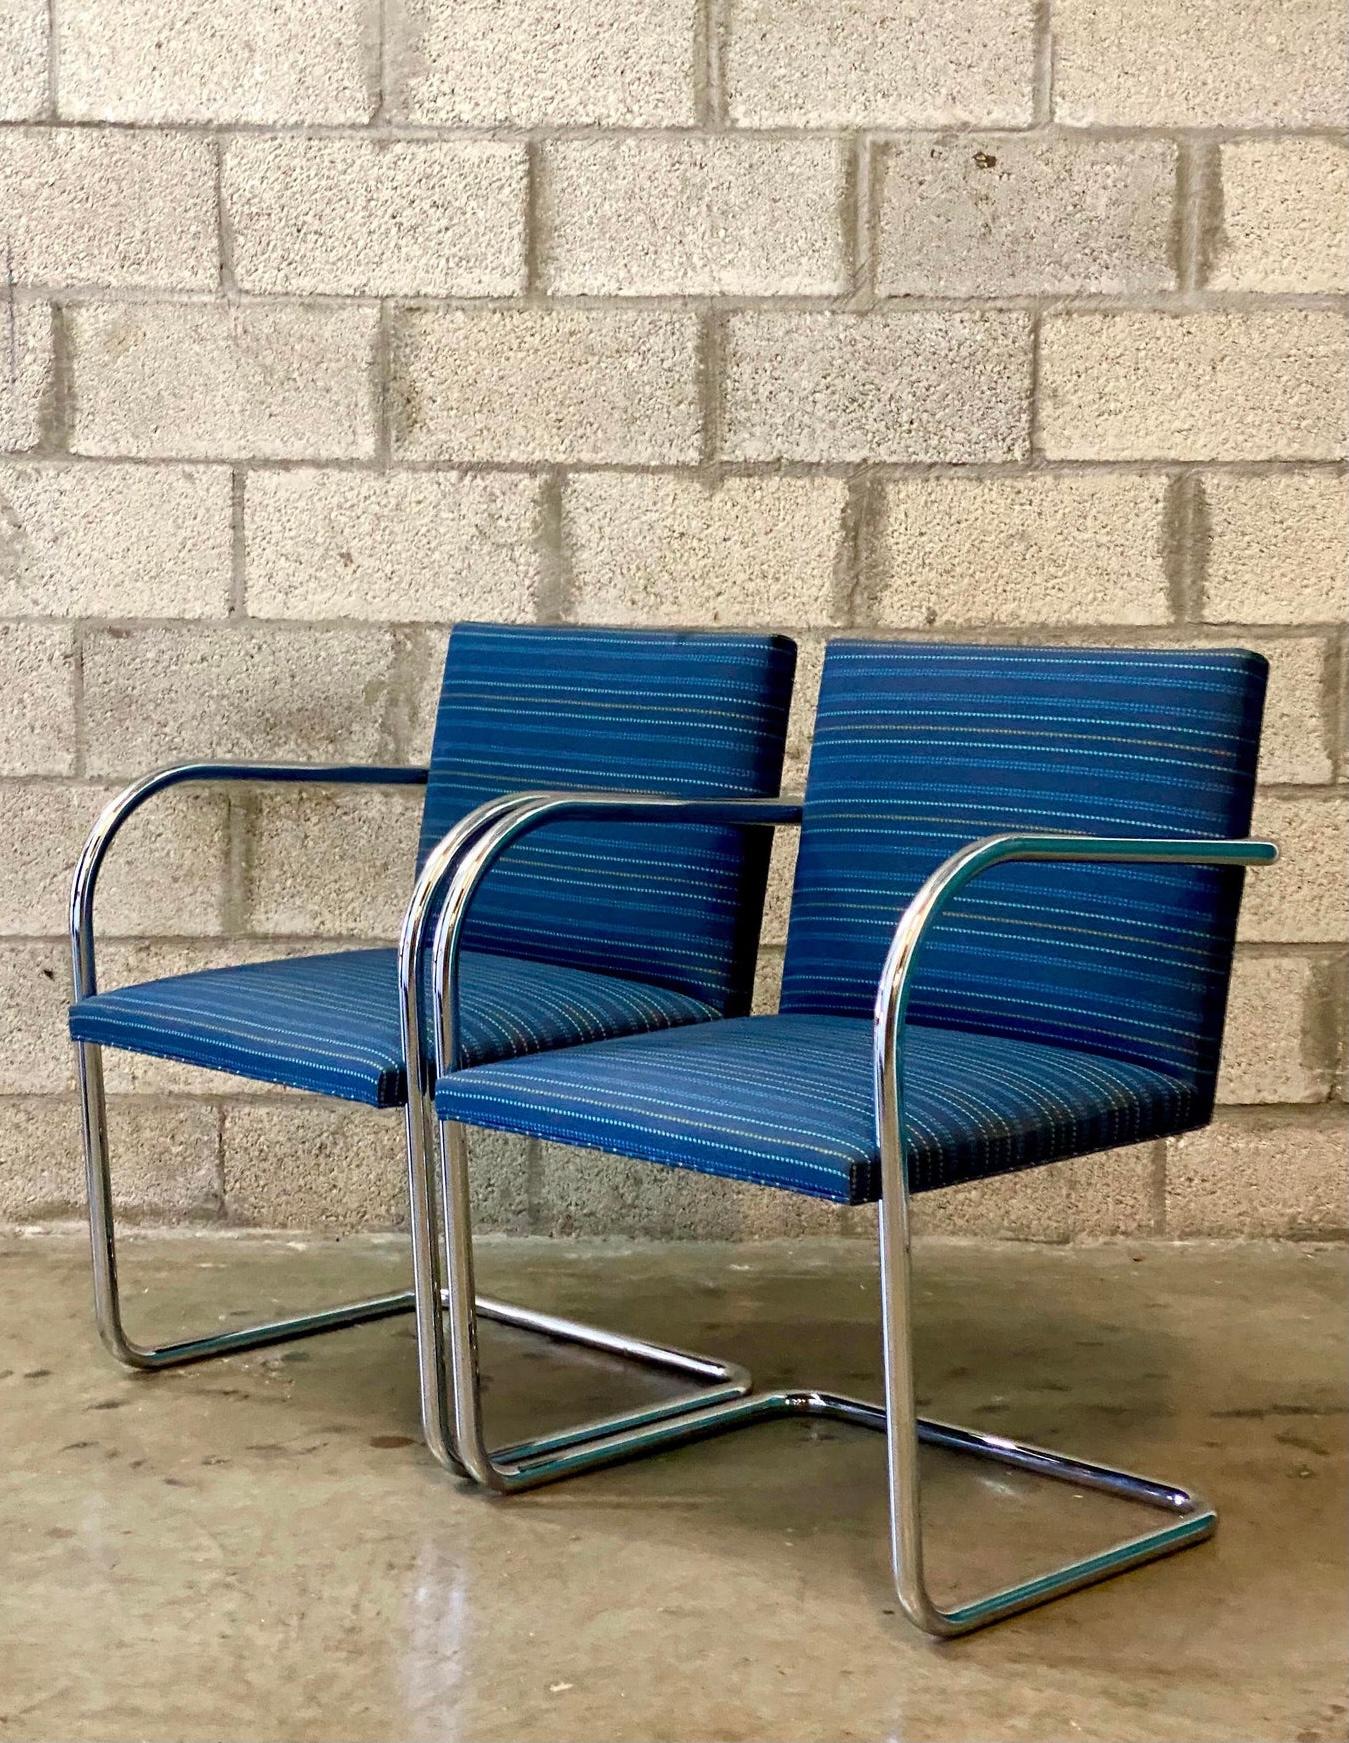 Vintage Midcentury Knoll Tubular BRNO Chairs, a Pair In Good Condition For Sale In west palm beach, FL